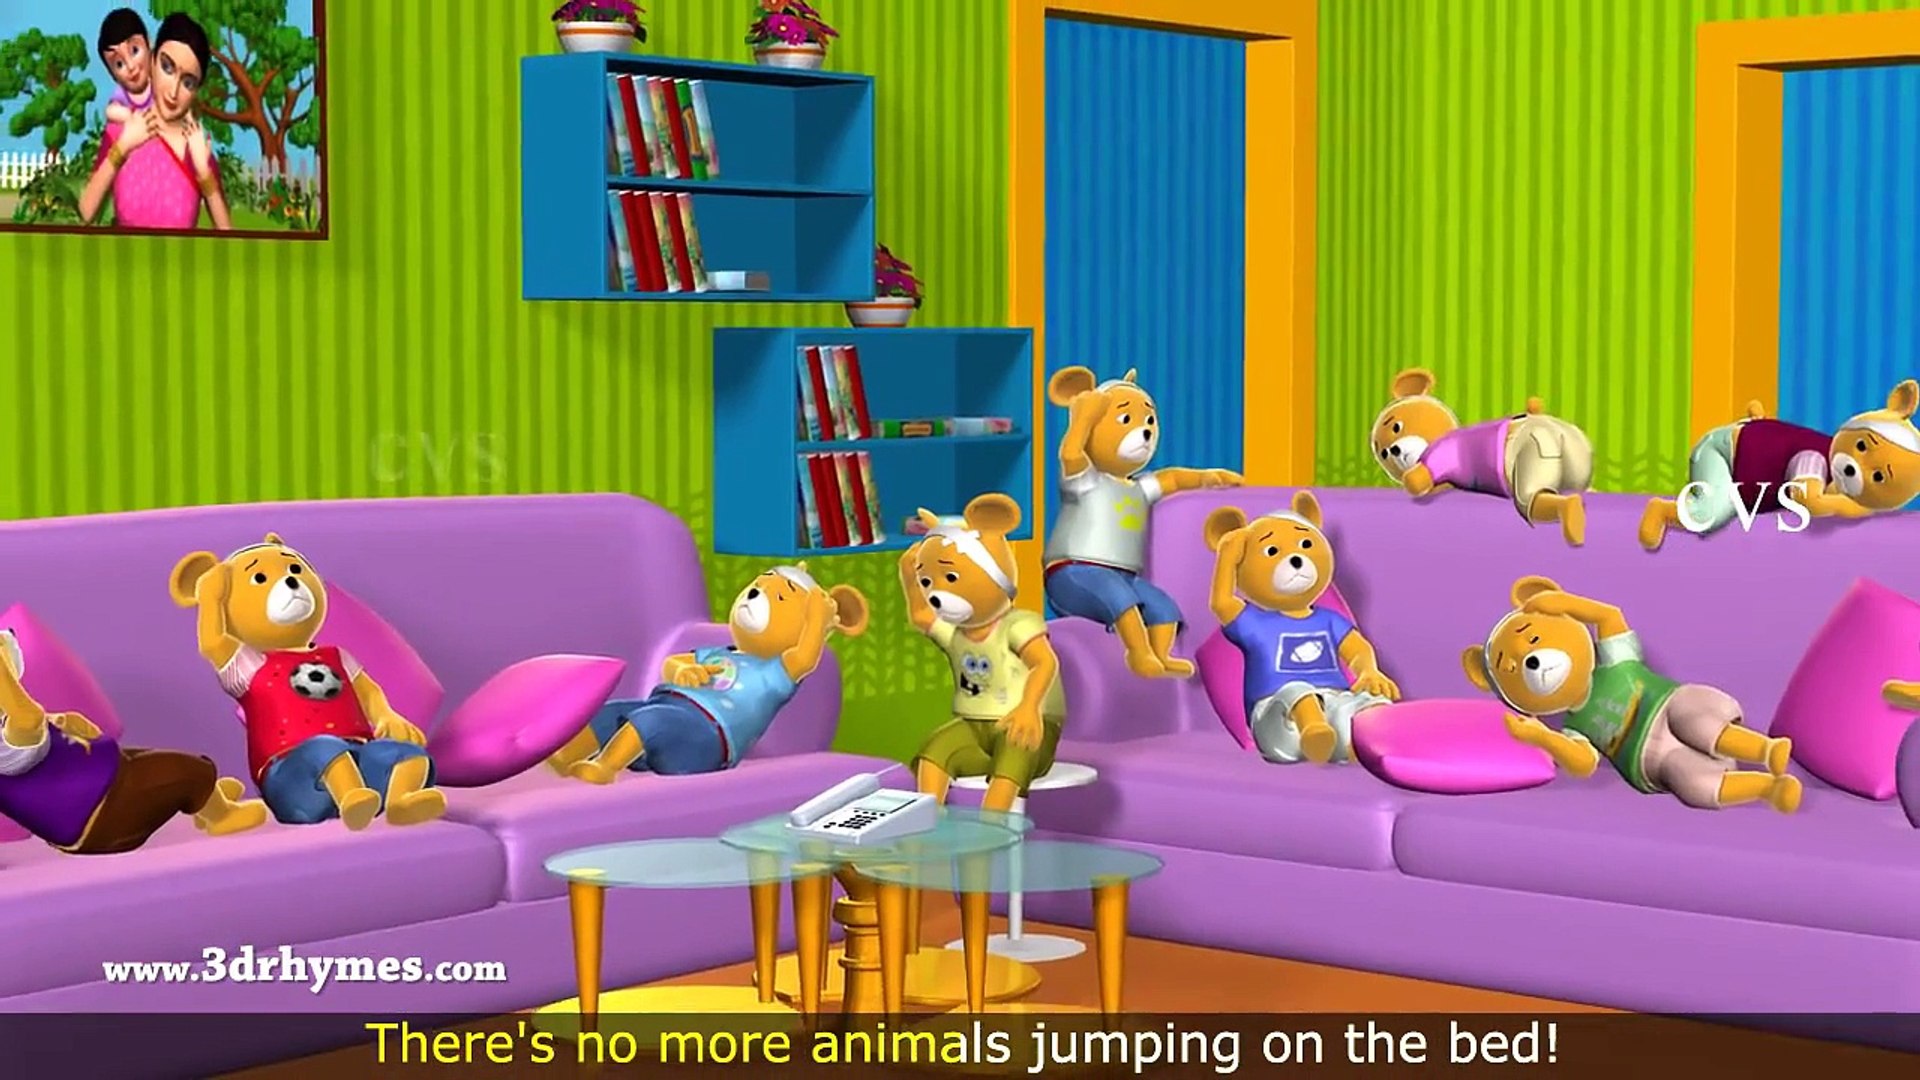 Ten Little Teddy Bears Jumping on the Bed Song 3D Animation Nursery Rhymes  for Children - Dailymotion Video